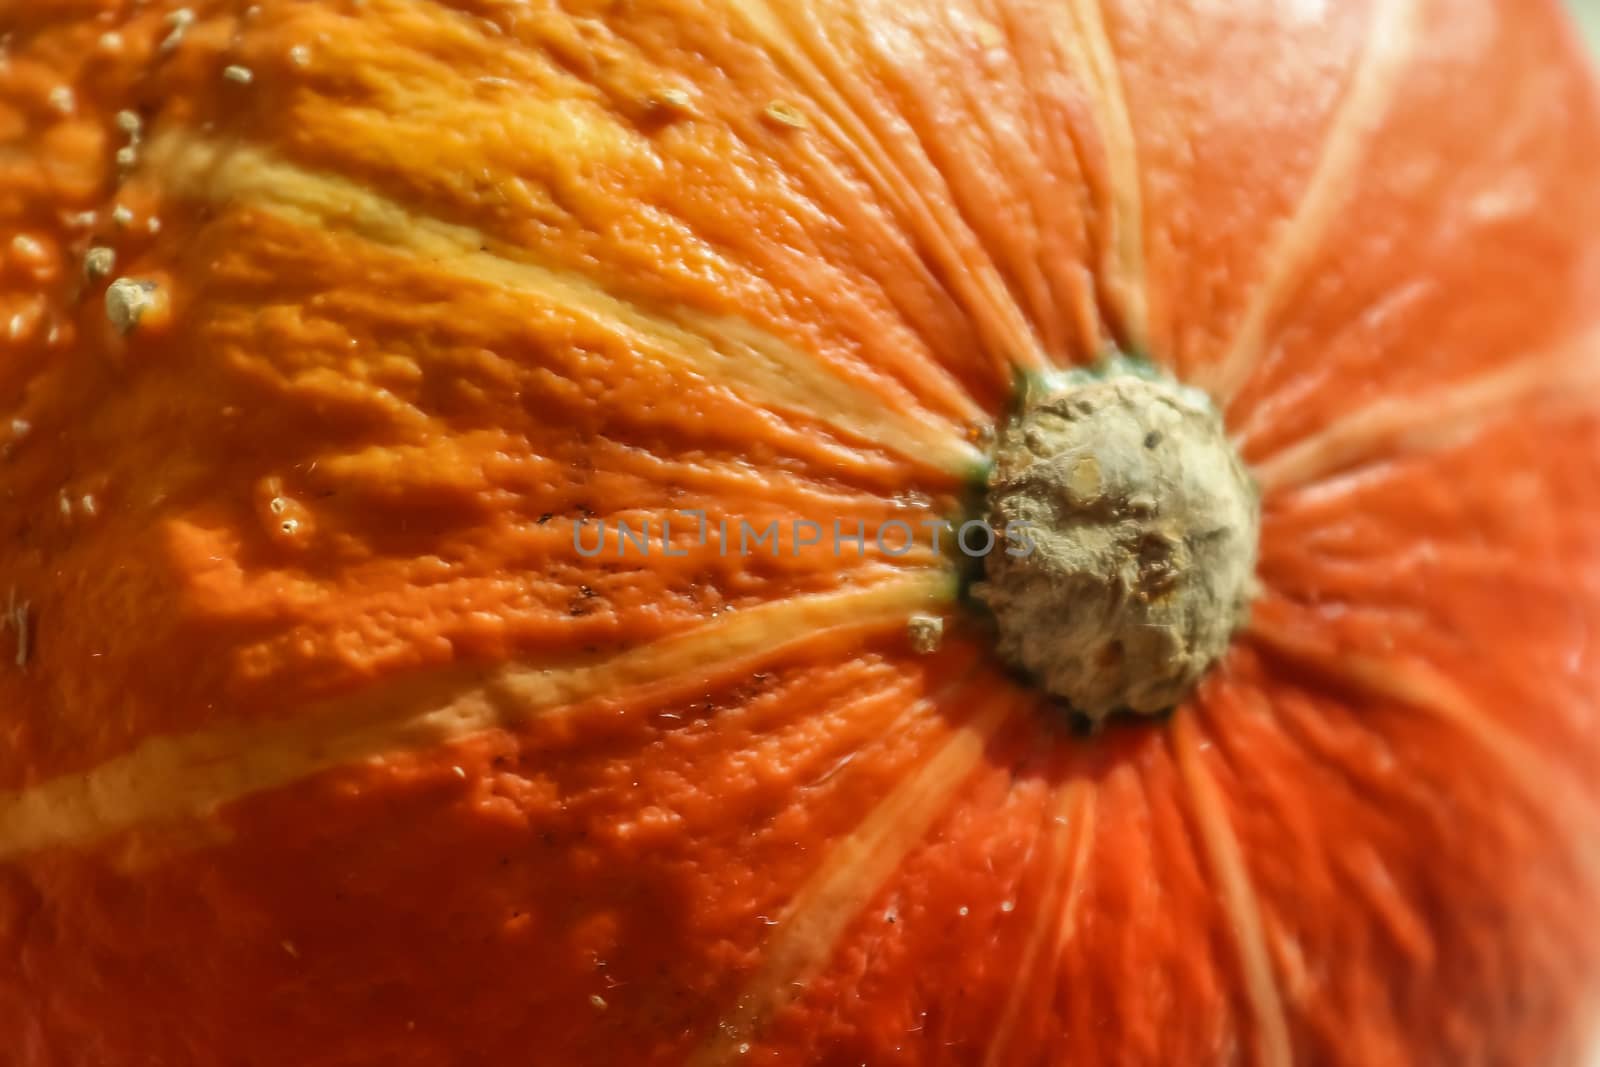 Beautiful orange pumpkin on a wooden background during helloween by MP_foto71